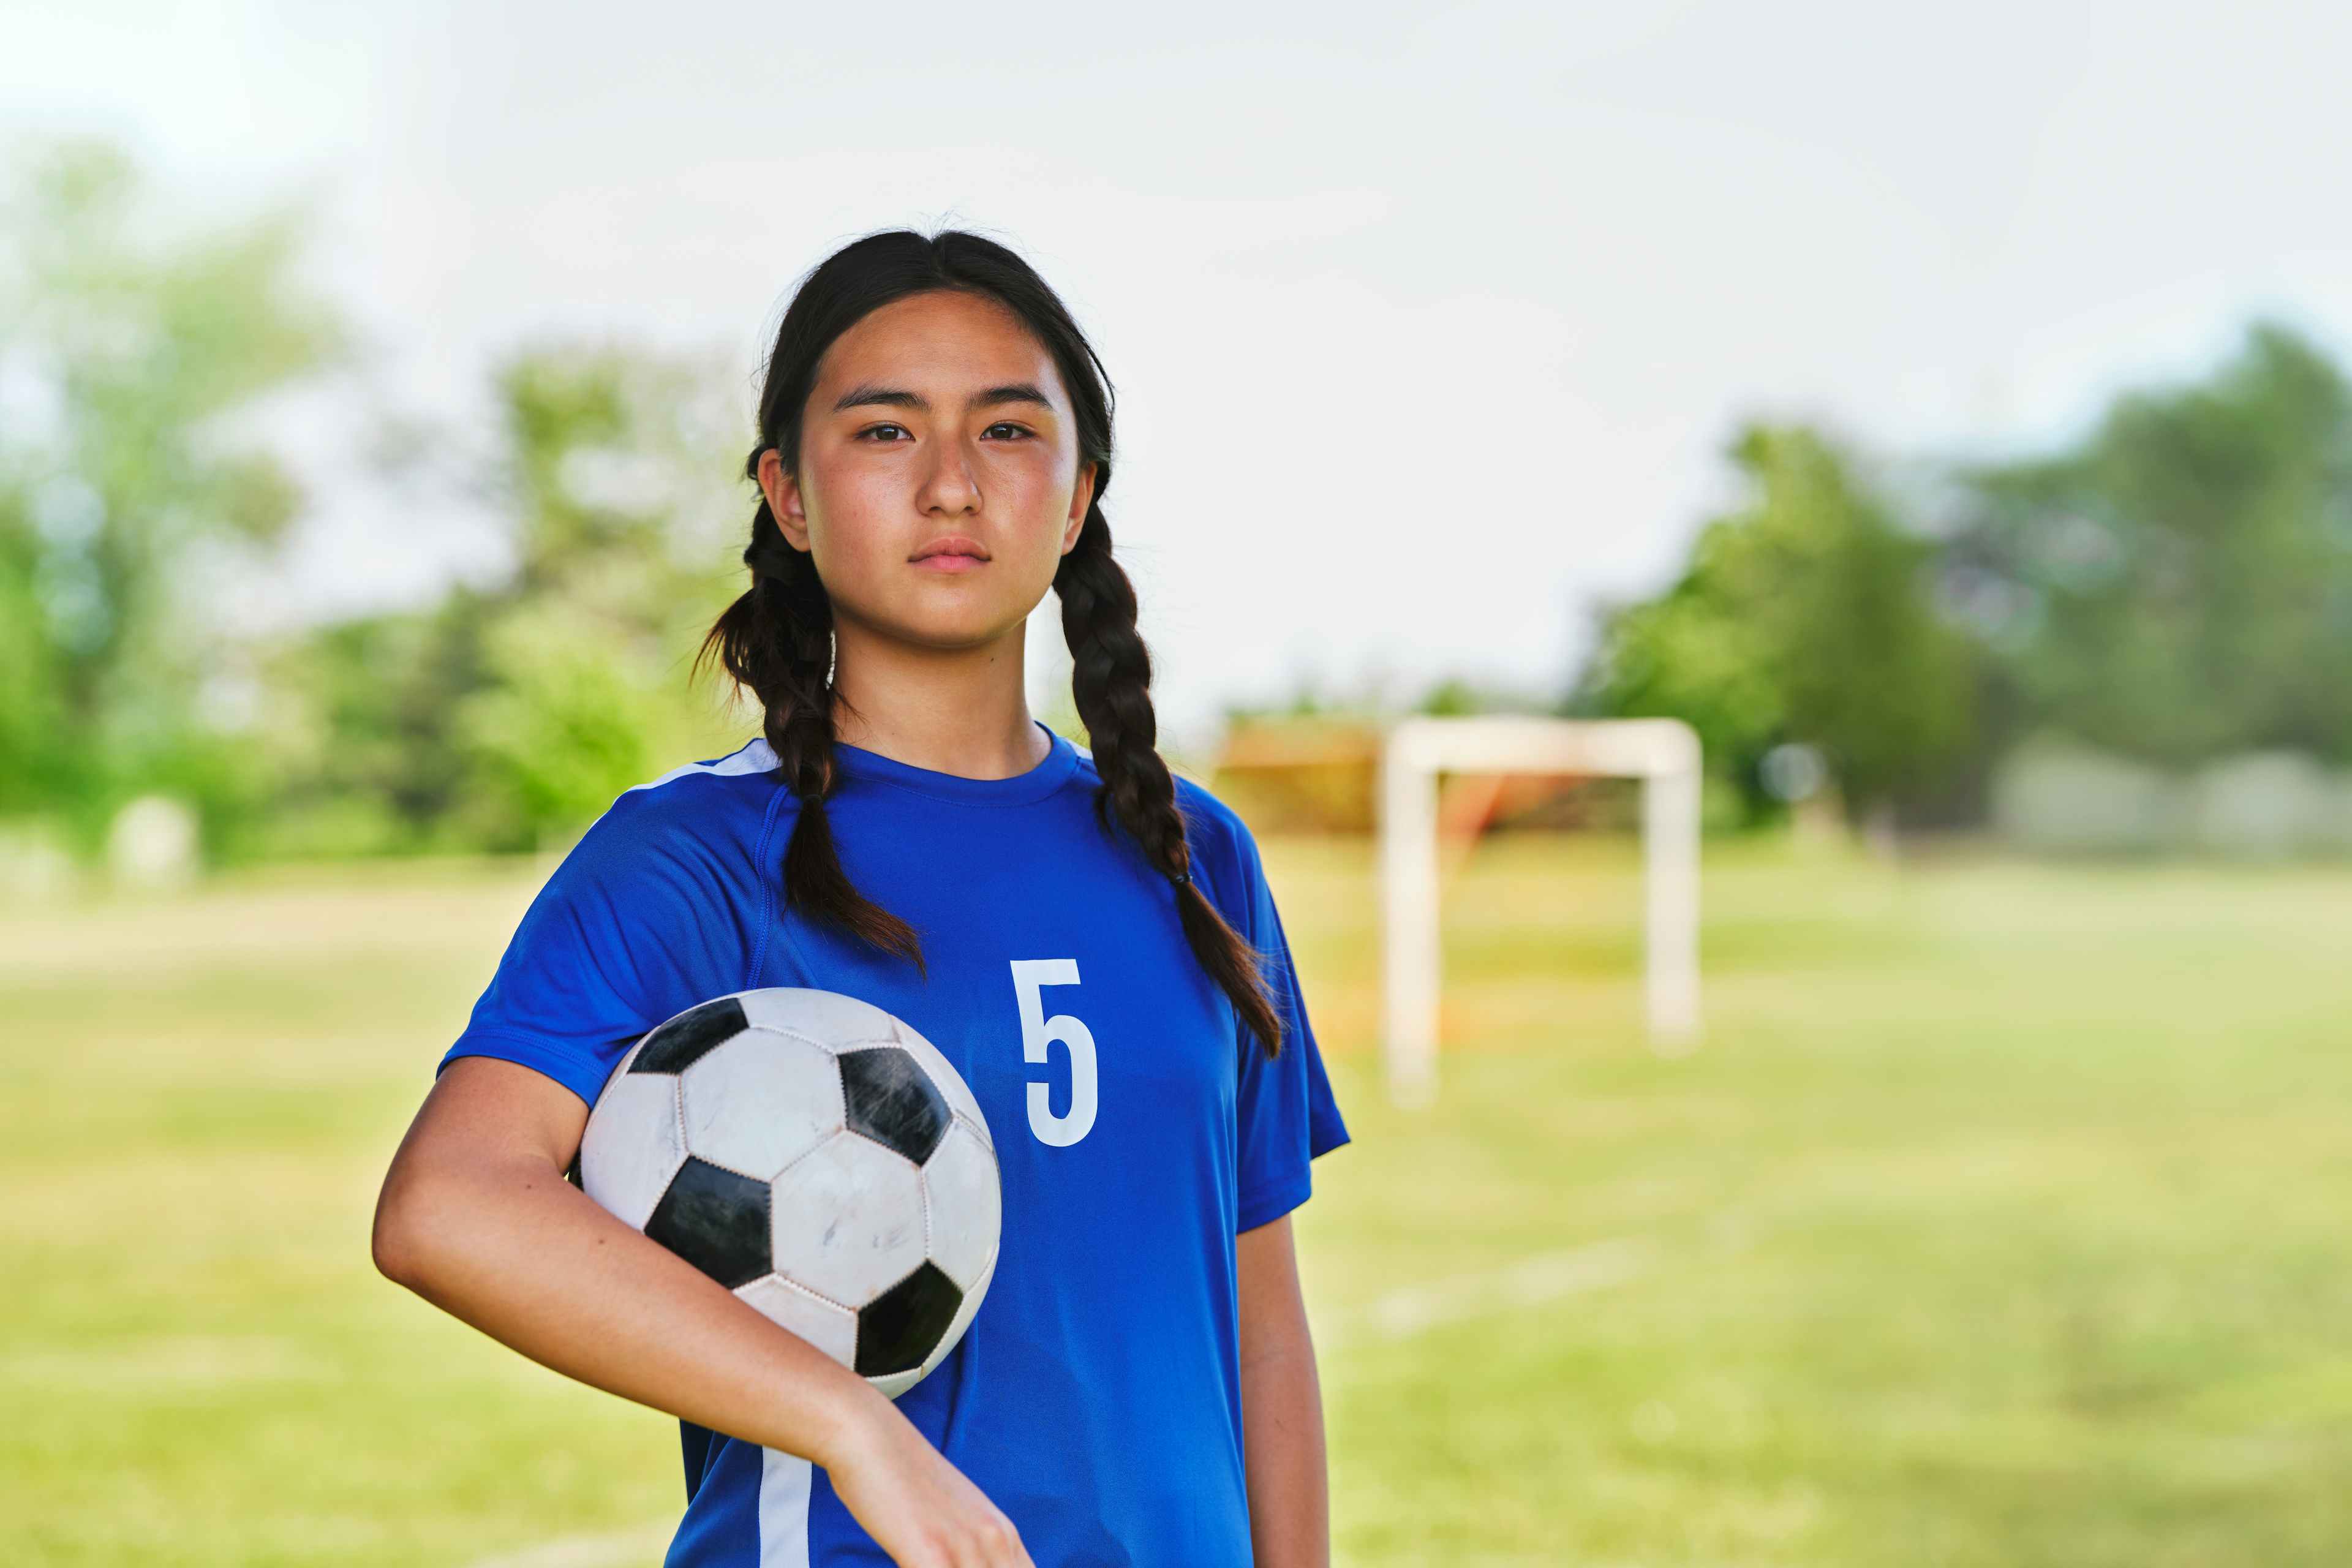 a young girl in a soccer uniform on a field 